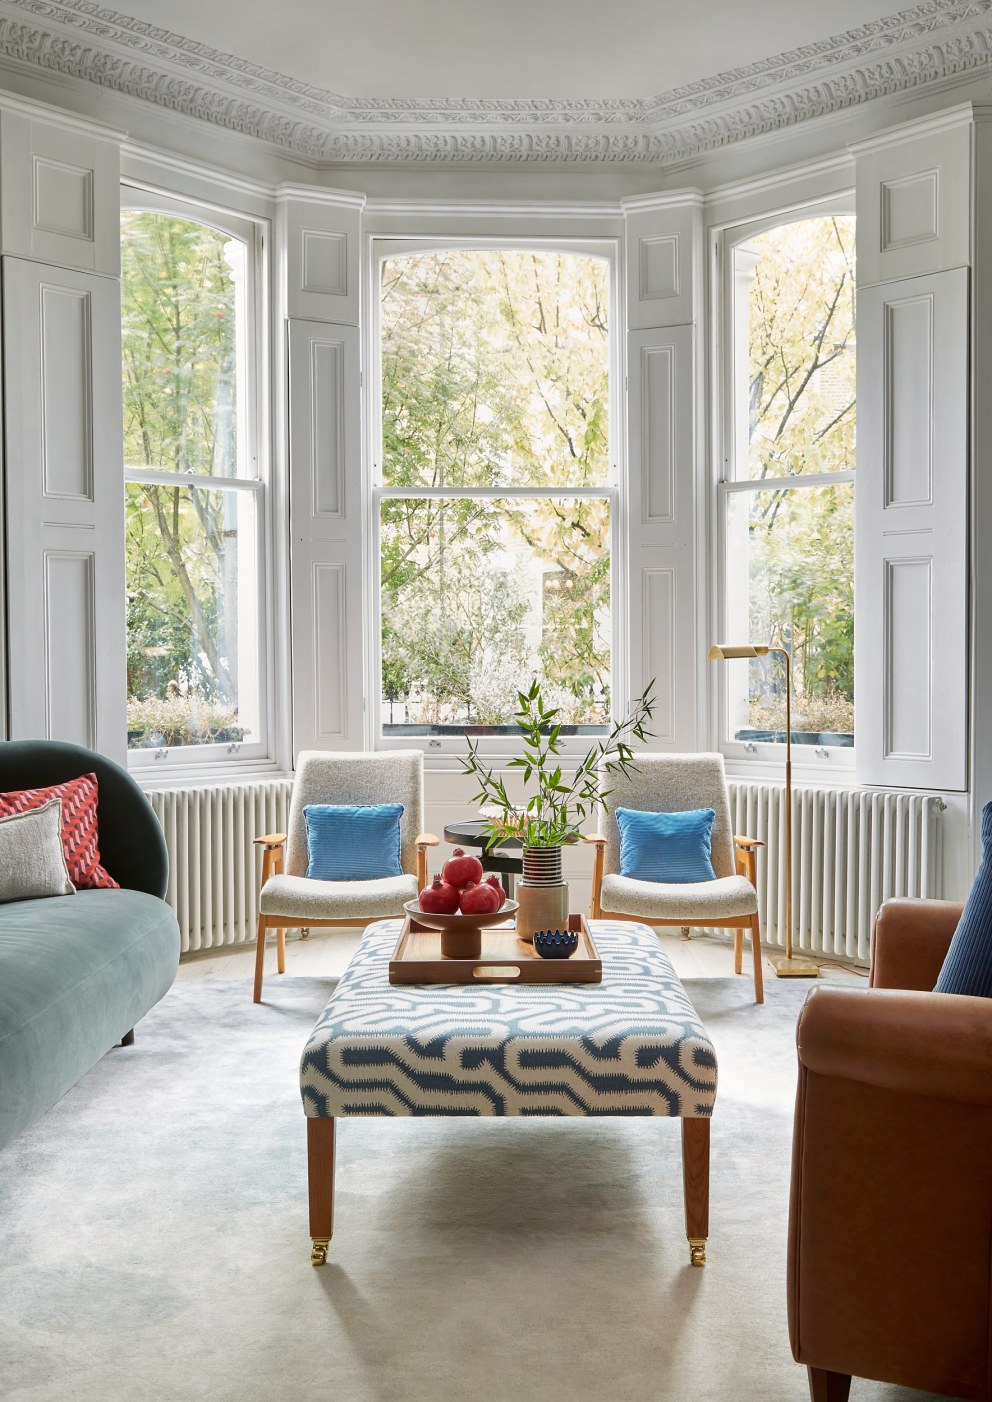 Tressillian Road | An elegant front room with vintage chairs & bespoke ottoman | Interior Designers